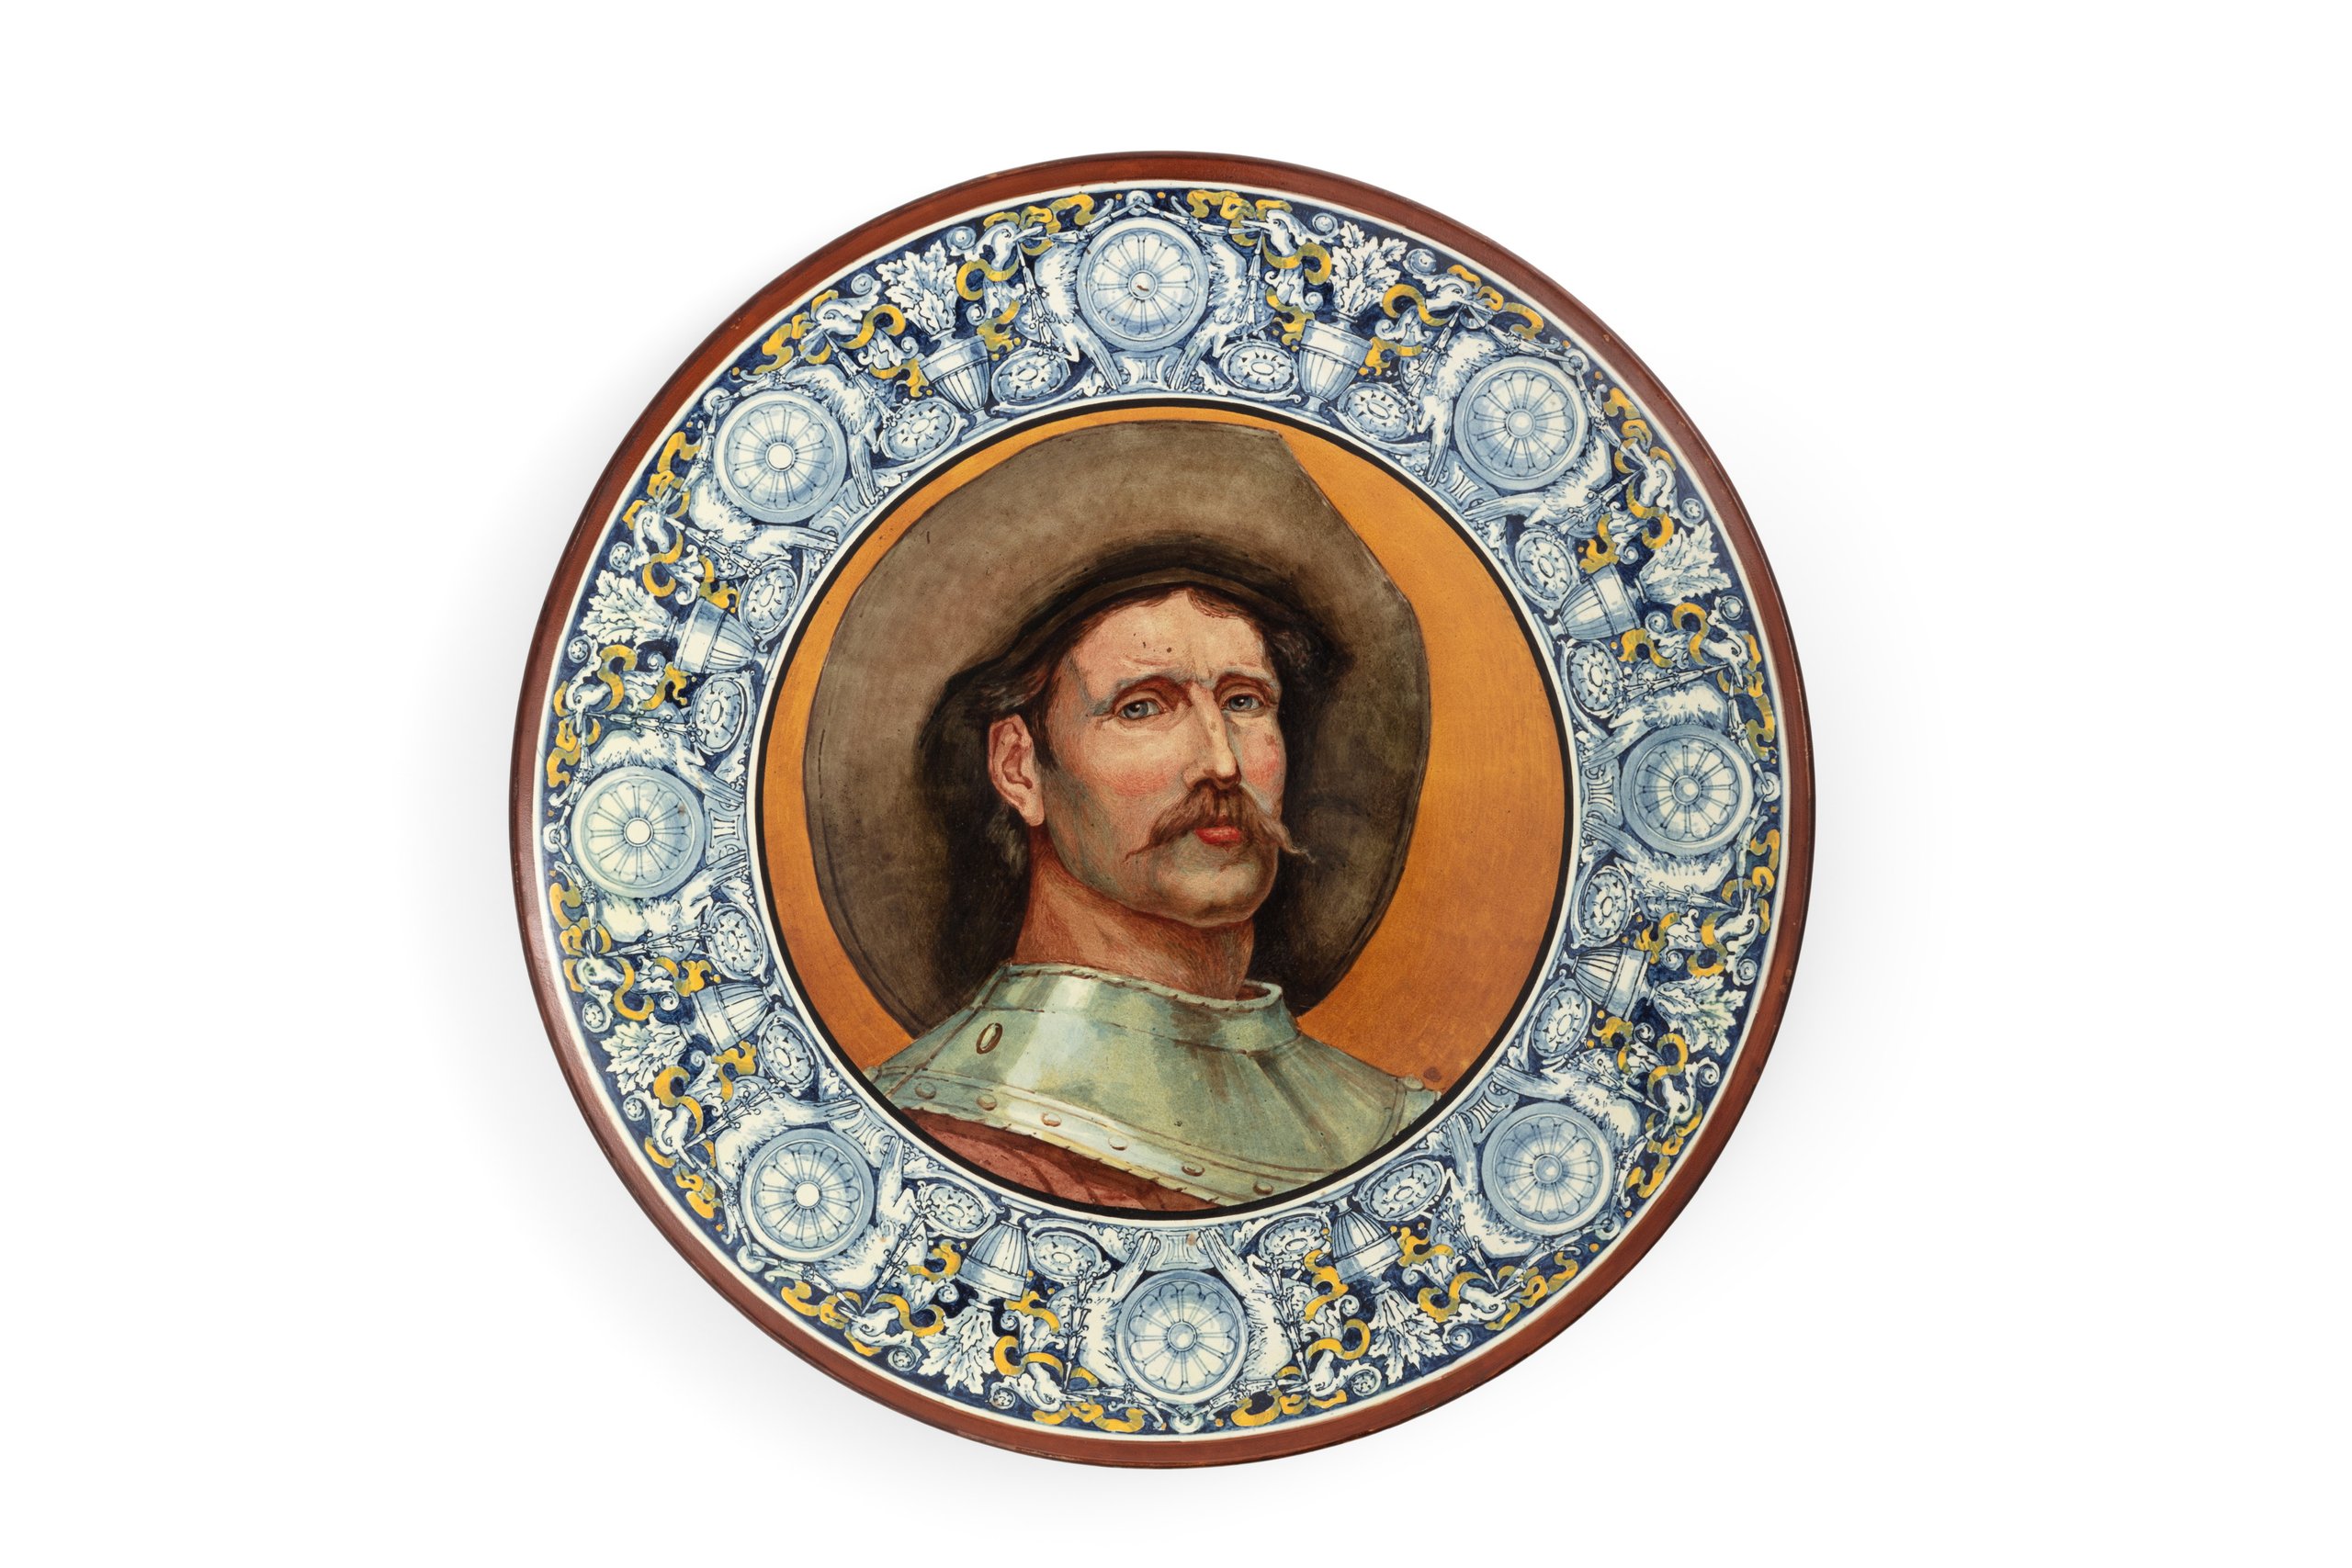 Faience plaque by Doulton & Co